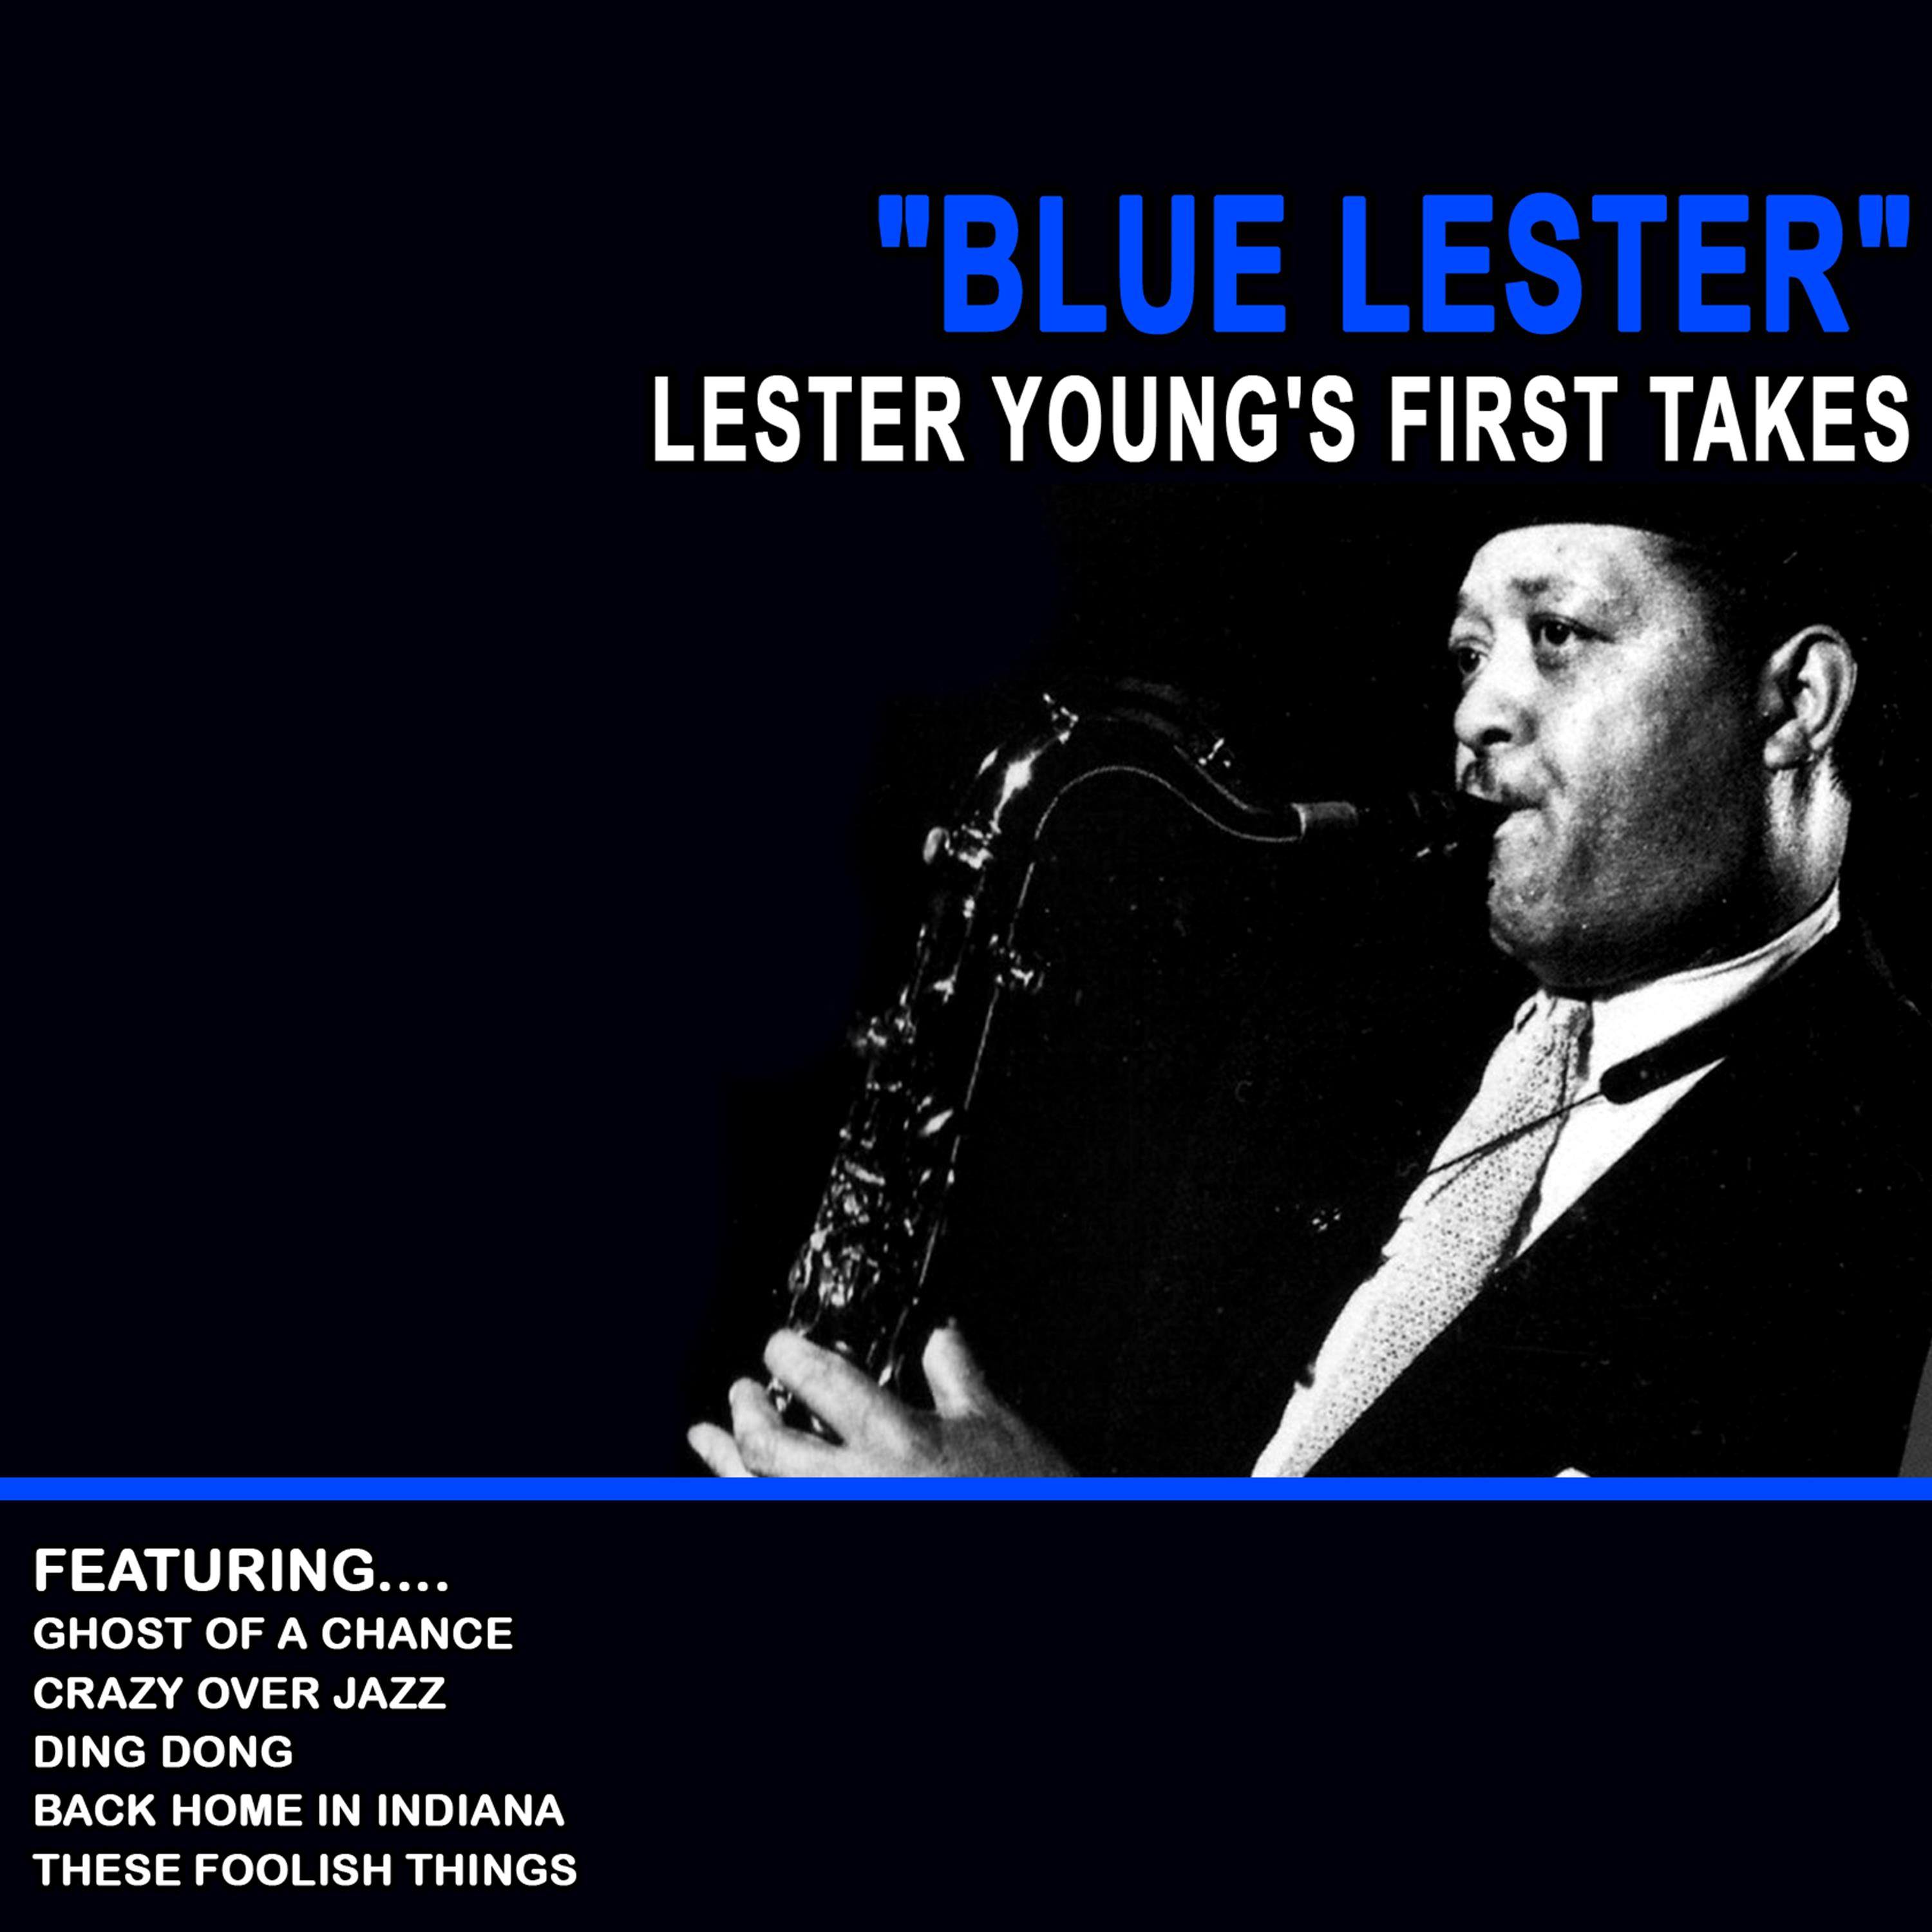 Blue Lester - Lester Young's First Takes